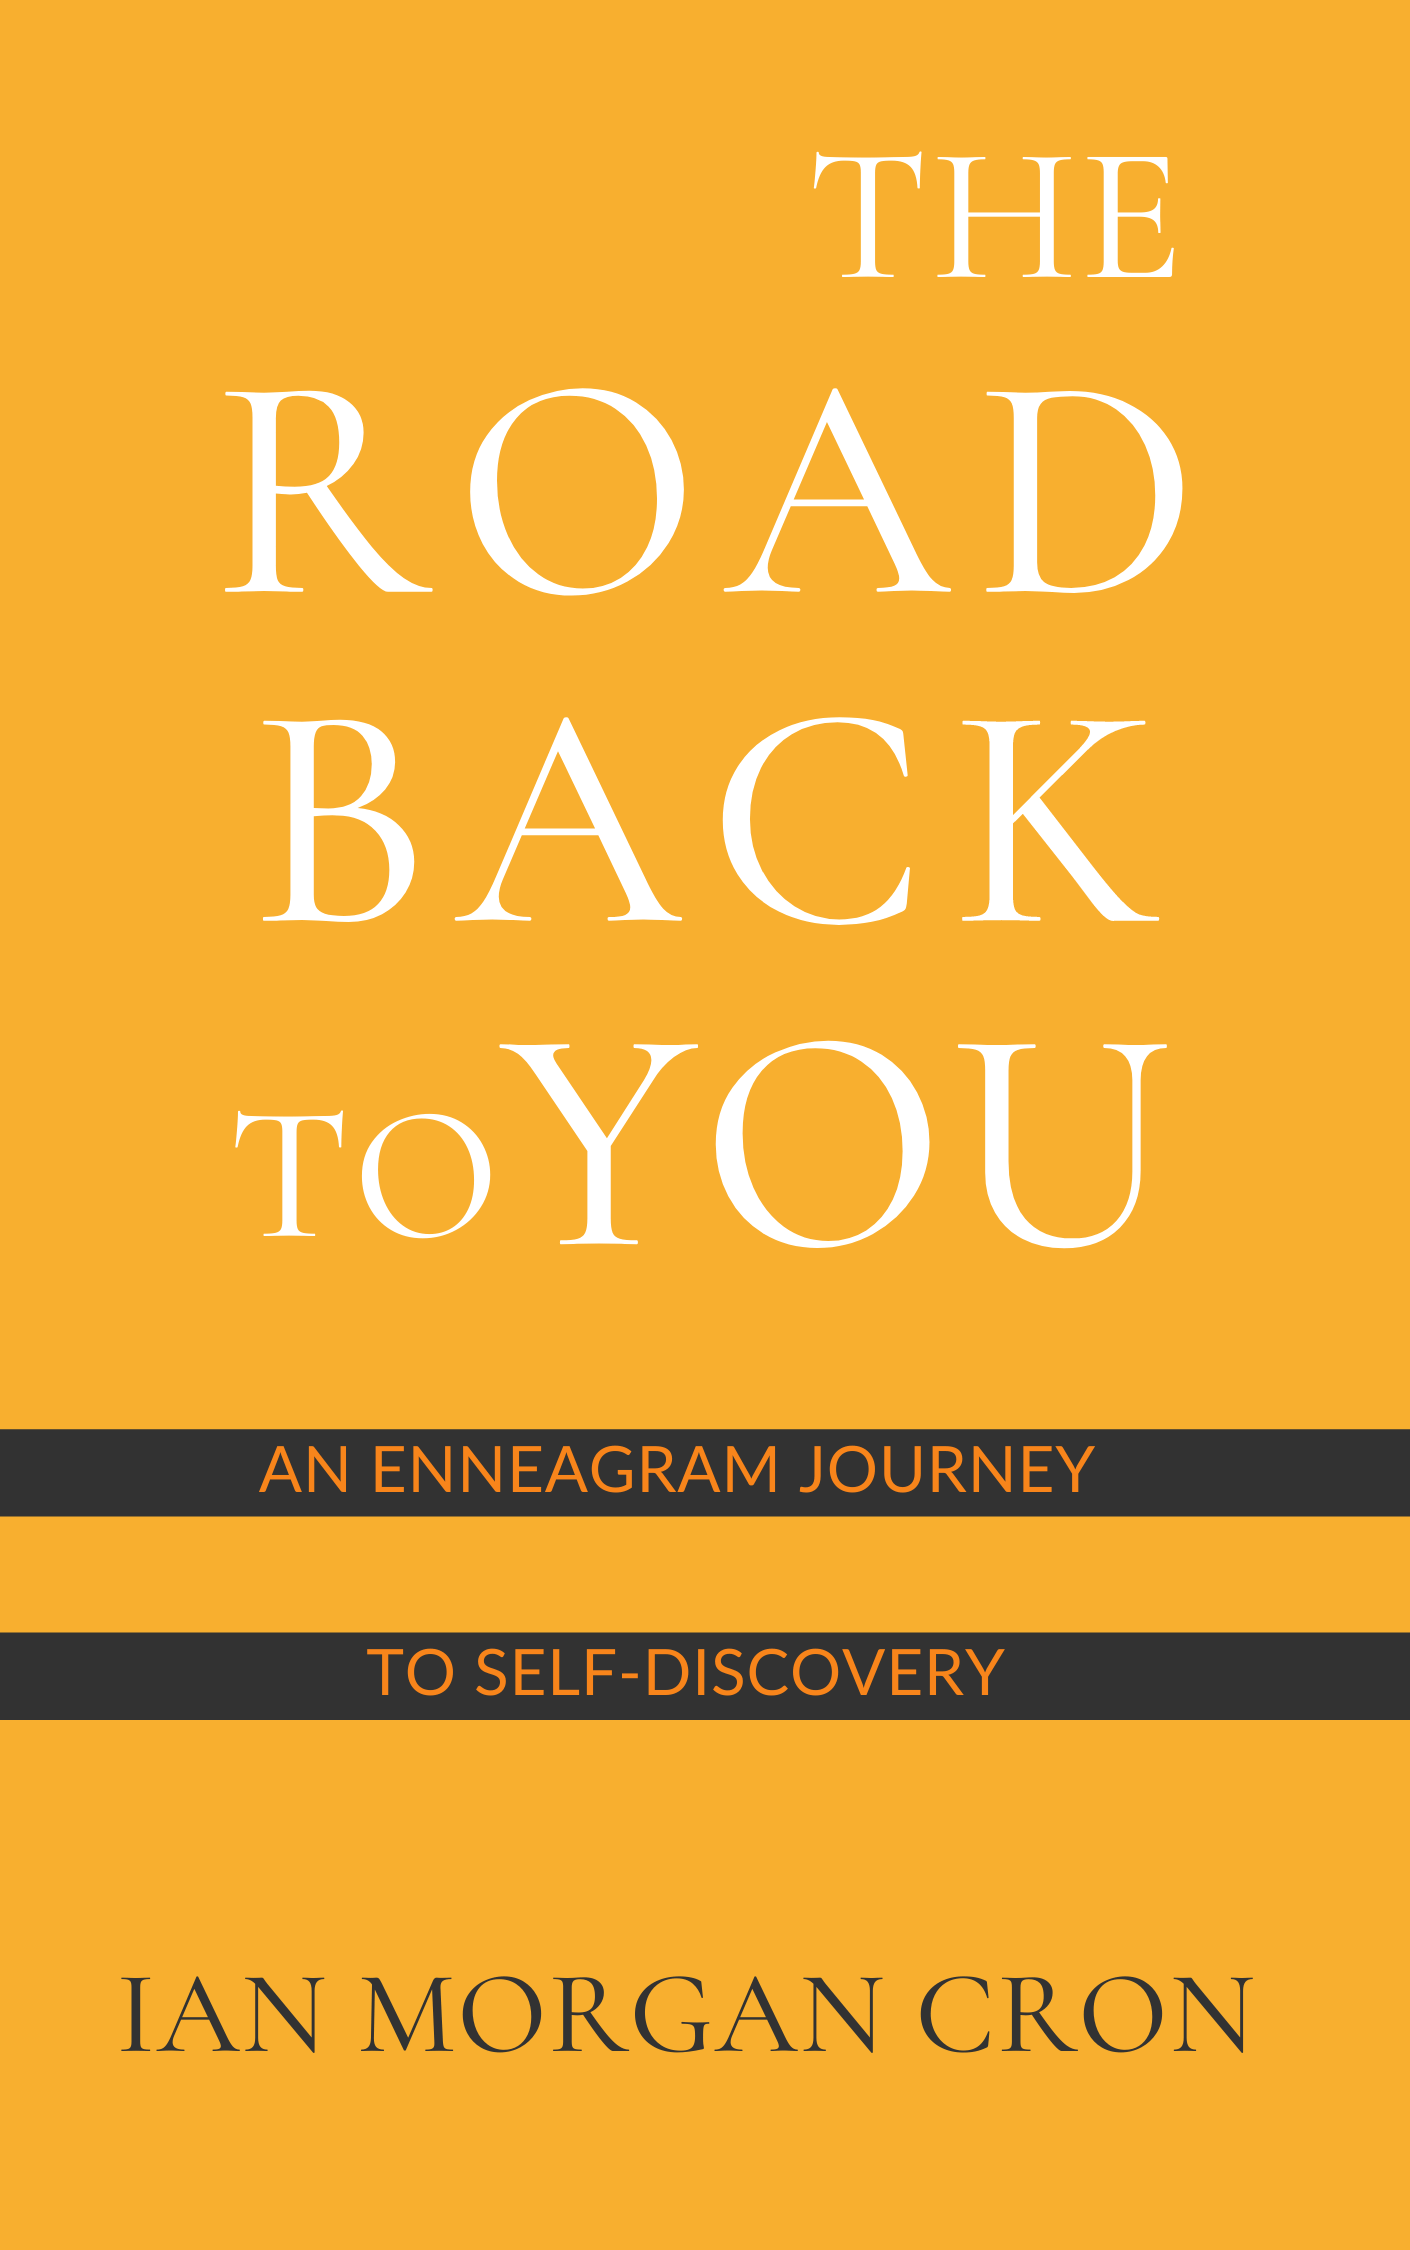 enneagram book the road back to you